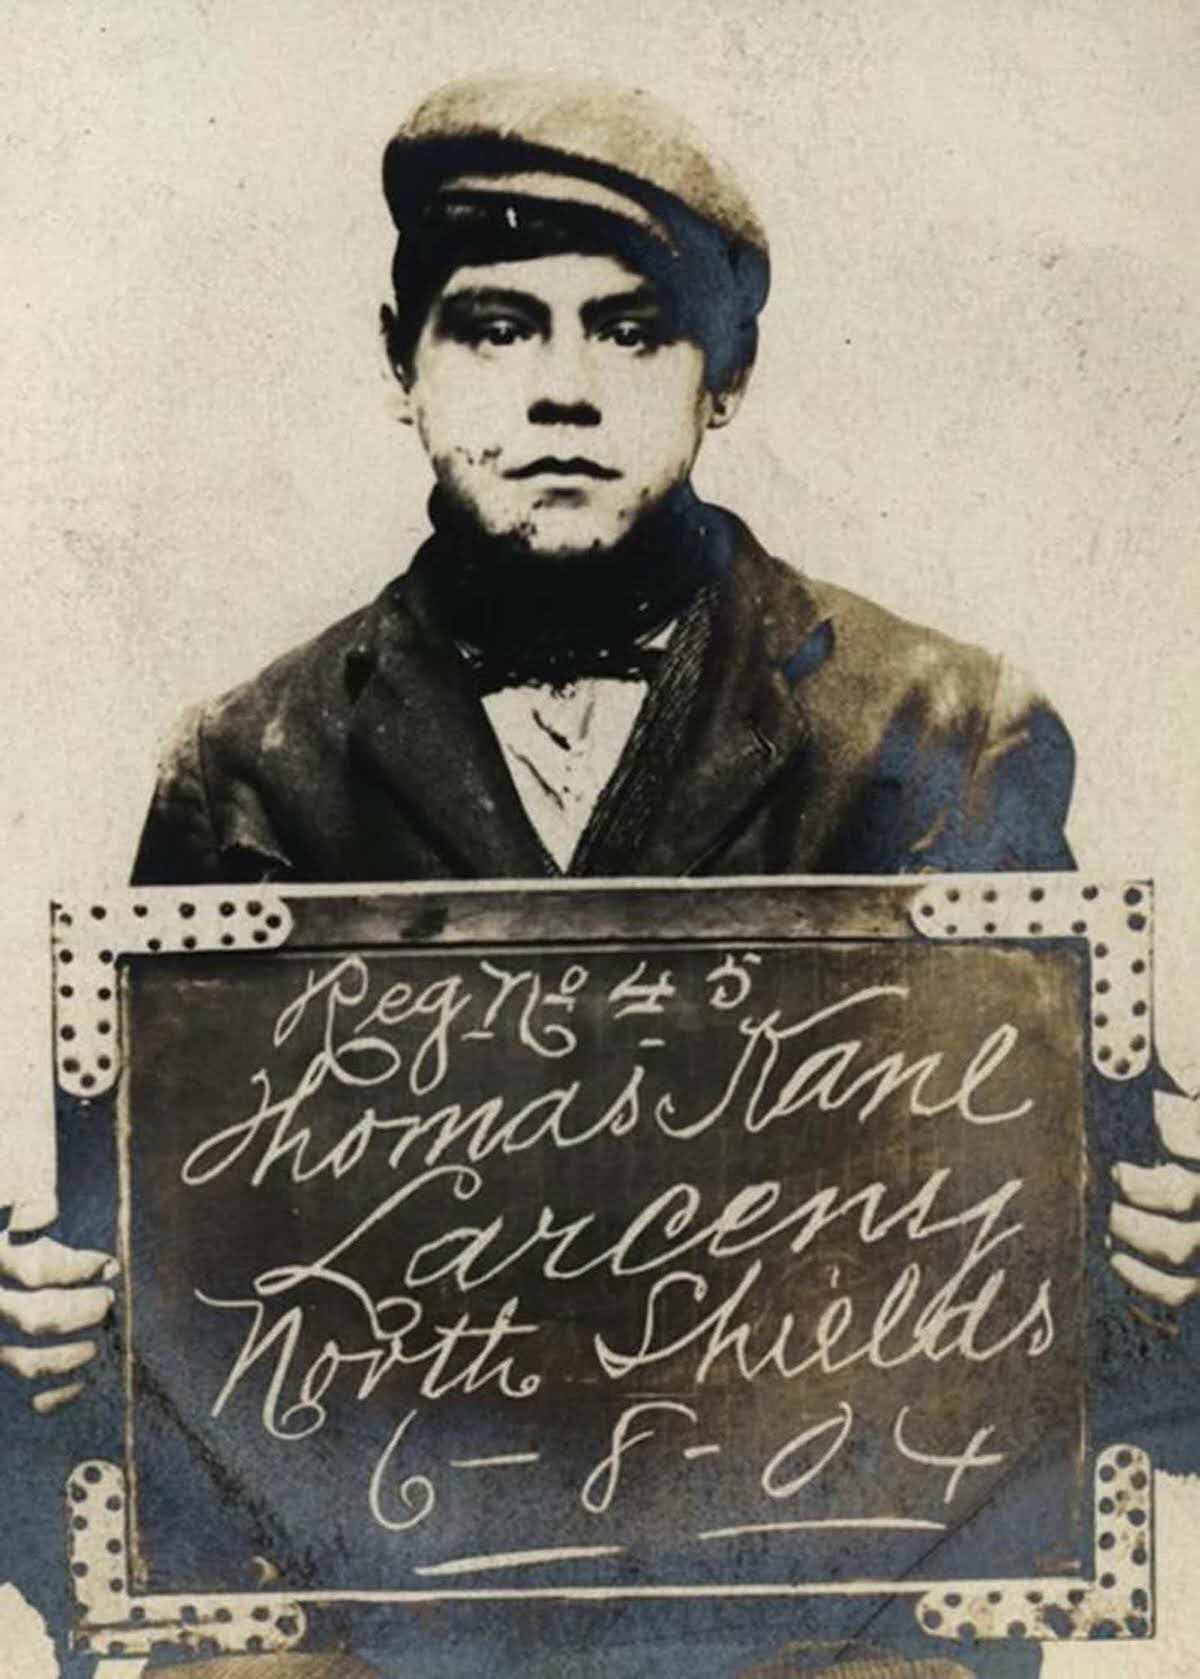 Thomas Kane, 16, arrested for stealing a pony, harness, and cart, 1904.